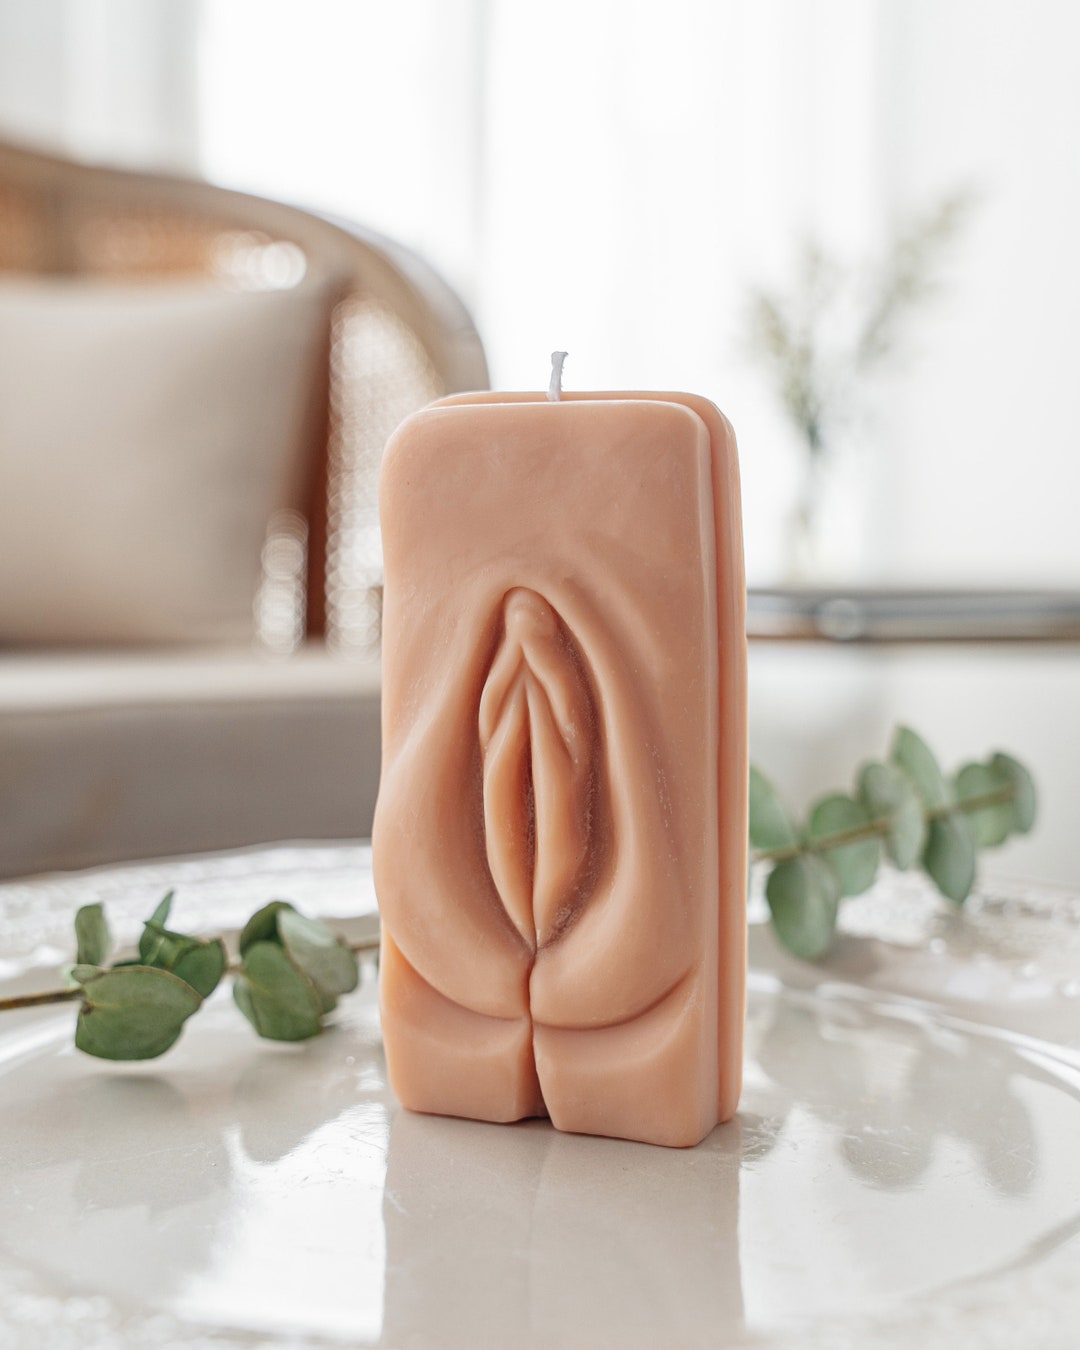 Vagina Candle / Yoni Candle / Pussy Vulva Fertility Candle / Scented Soy Wax Candle - Etsy 日本